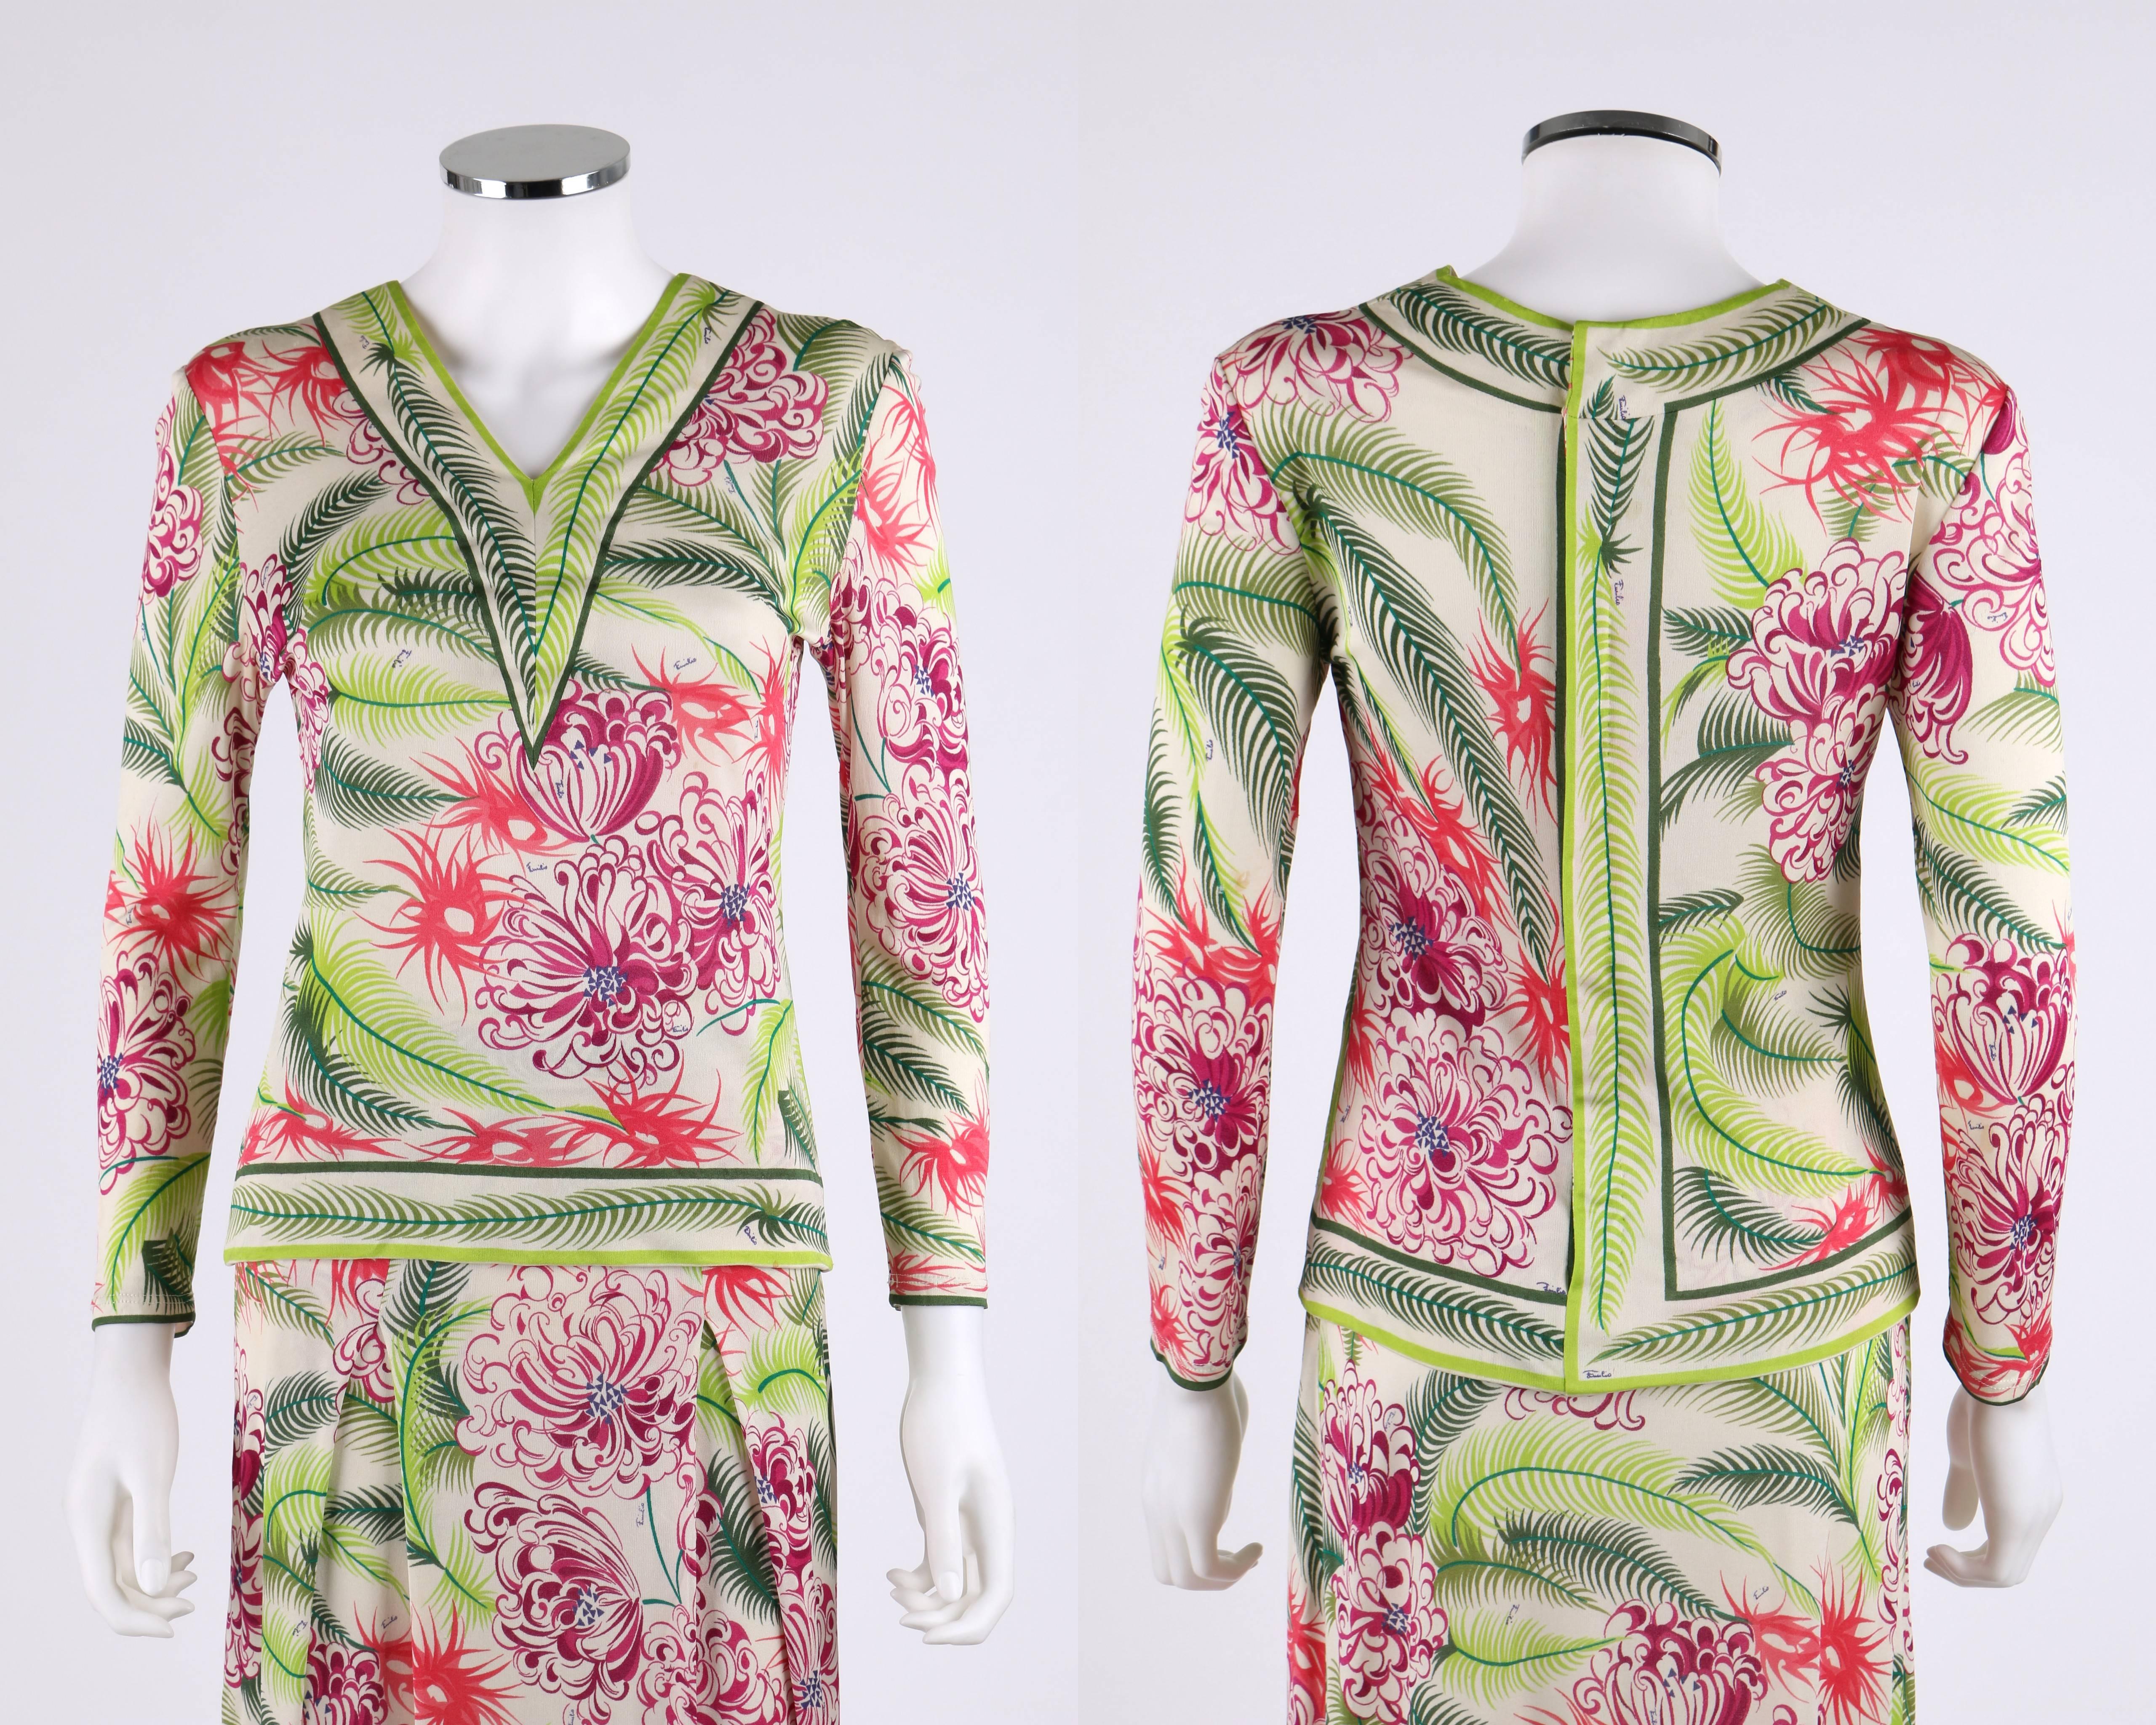 Vintage 1960's Emilio Pucci two piece multi-color tropical floral palm / fern print blouse and skirt. Long sleeve top has v-neckline. Center back zipper with snaps. A-line skirt. Two inverted pleats at front. Size zipper closure. Waistband has hook